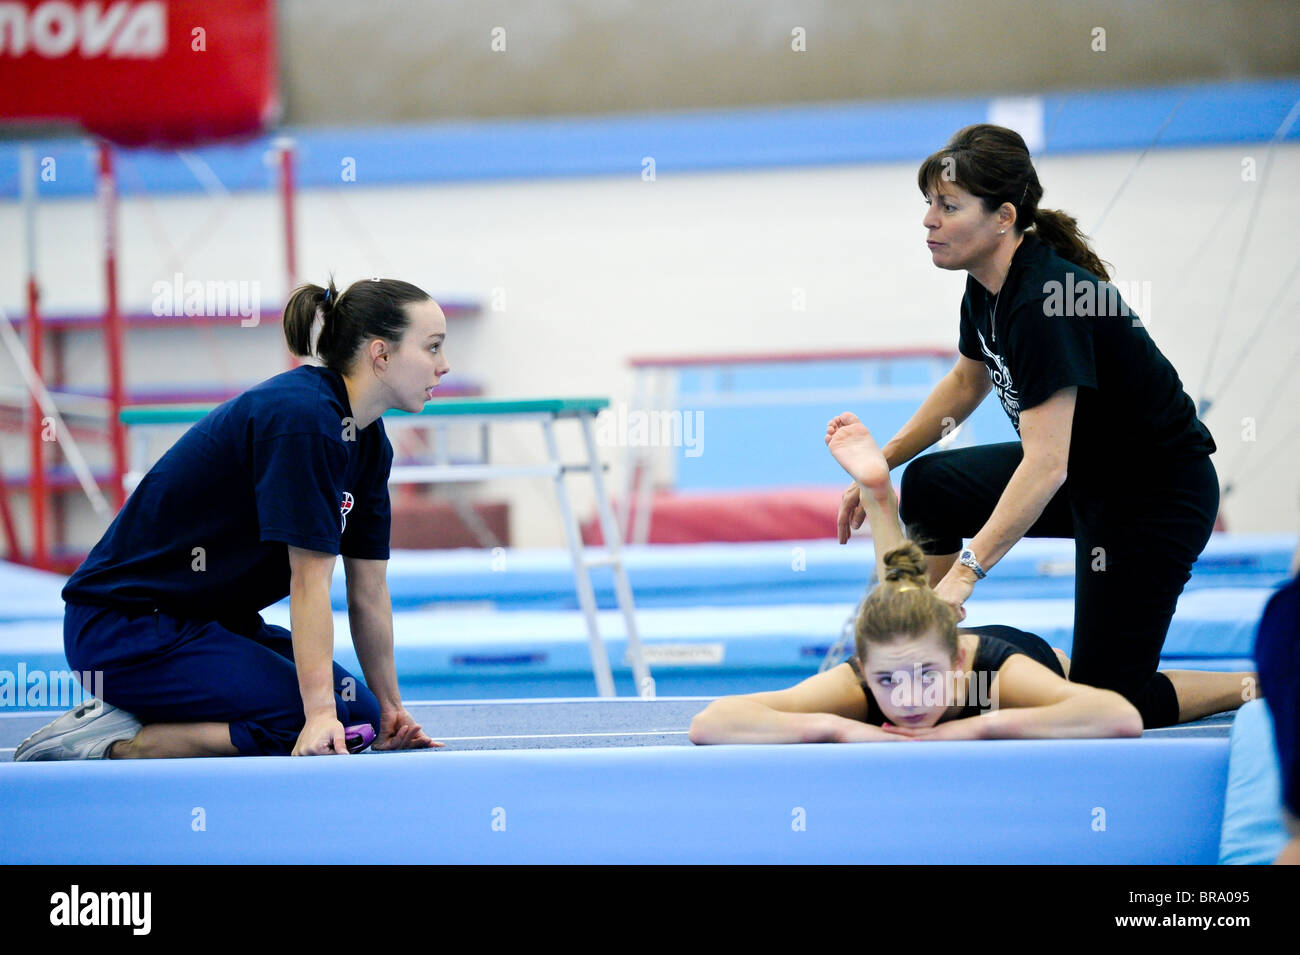 21.9.10 British Gymnastics Press Day.Members of the National Squad in training before the Commonwealth and World Championships. Stock Photo